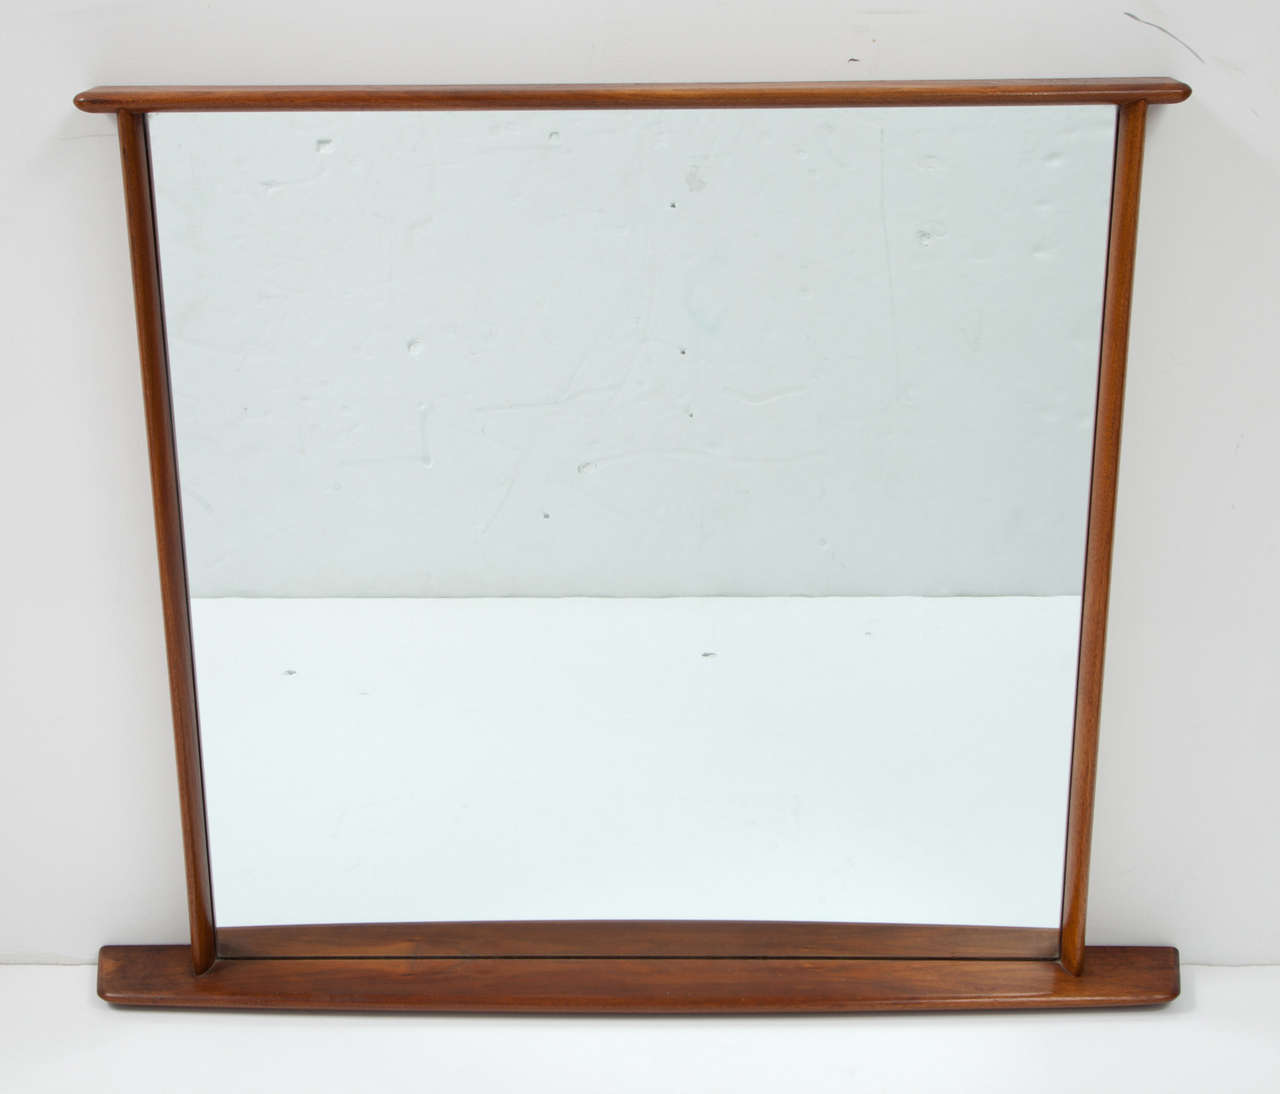 Walnut wall mirror, model 216-W,  with overhanging edge, made by Widdicomb.